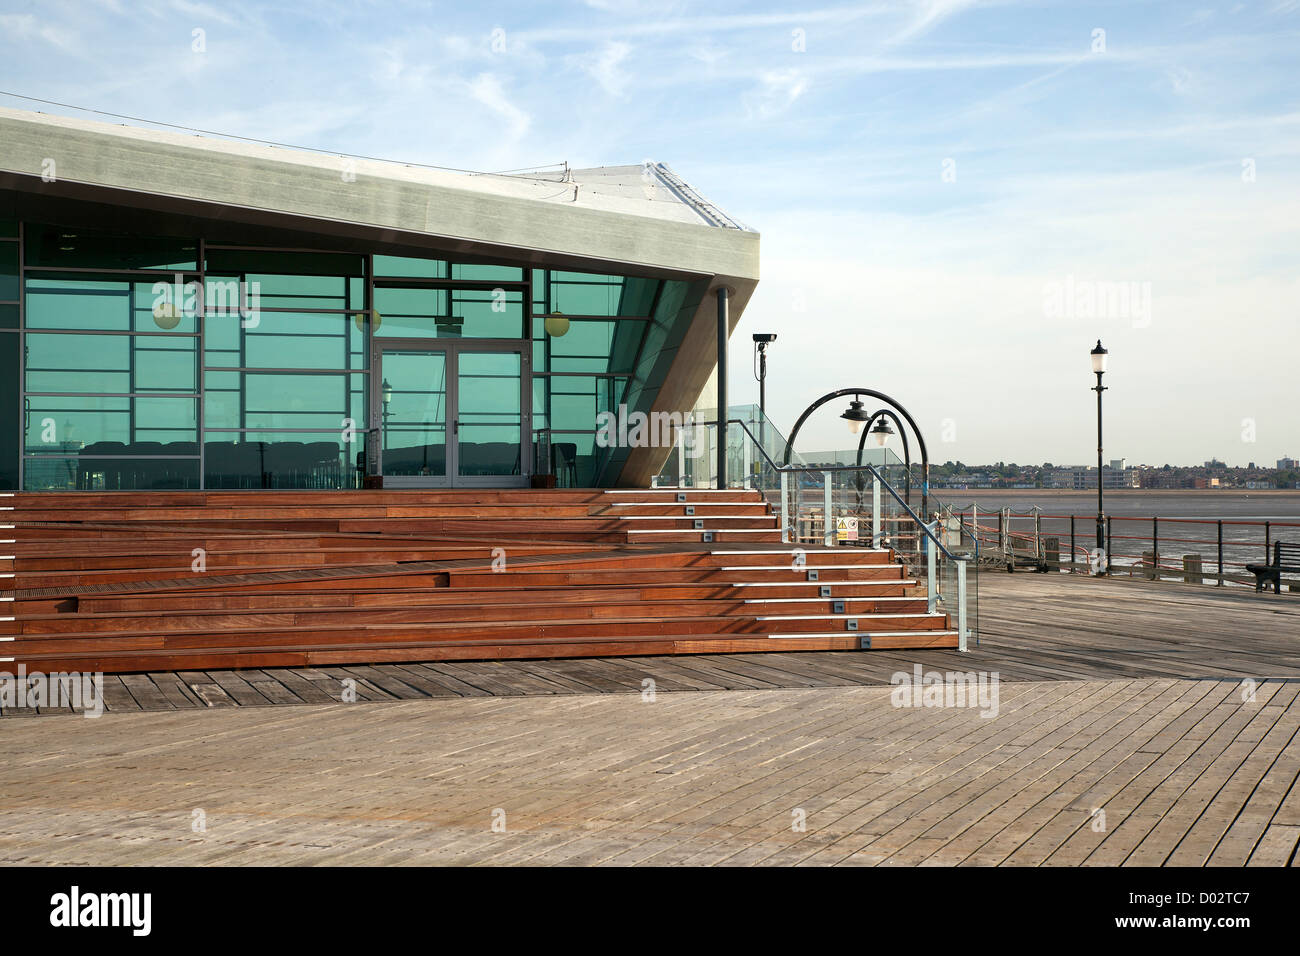 Southend Pier Cultural Centre, Southend, United Kingdom. Architect: White Architects, 2012. View of the main front elevation sho Stock Photo